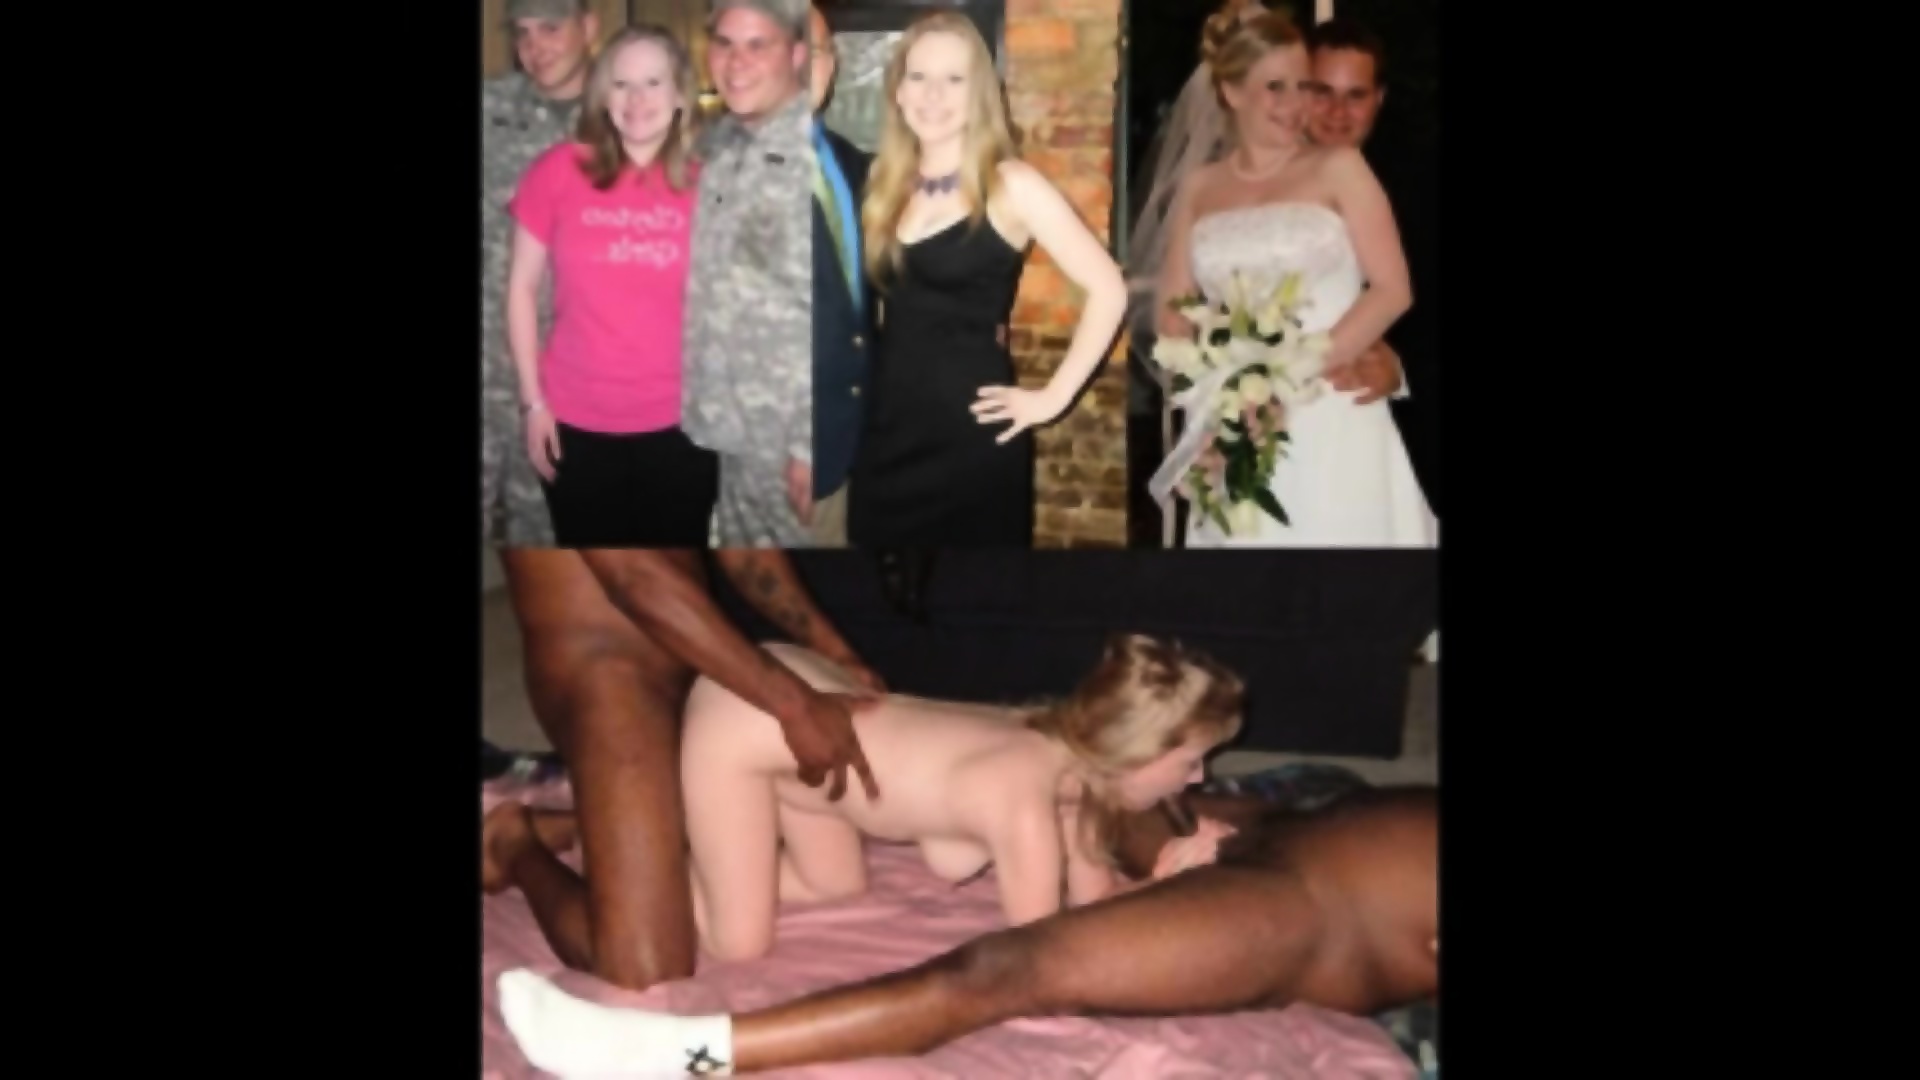 Brides Dressed, Undressed And Fucked Compilation